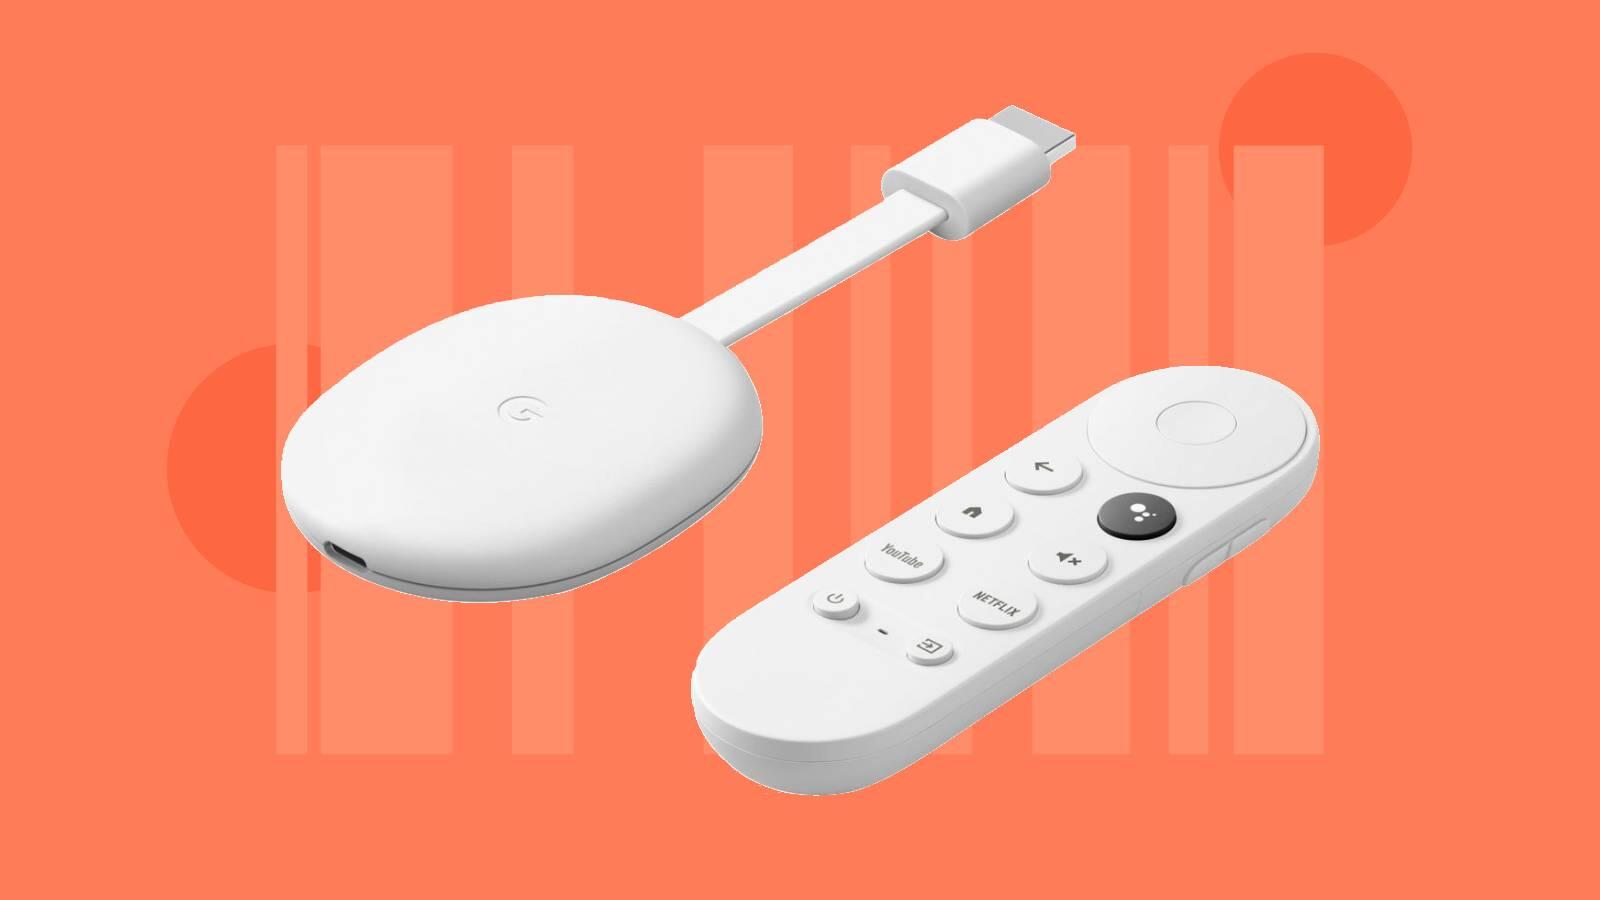 Our best Chromecast yet, now with Google TV